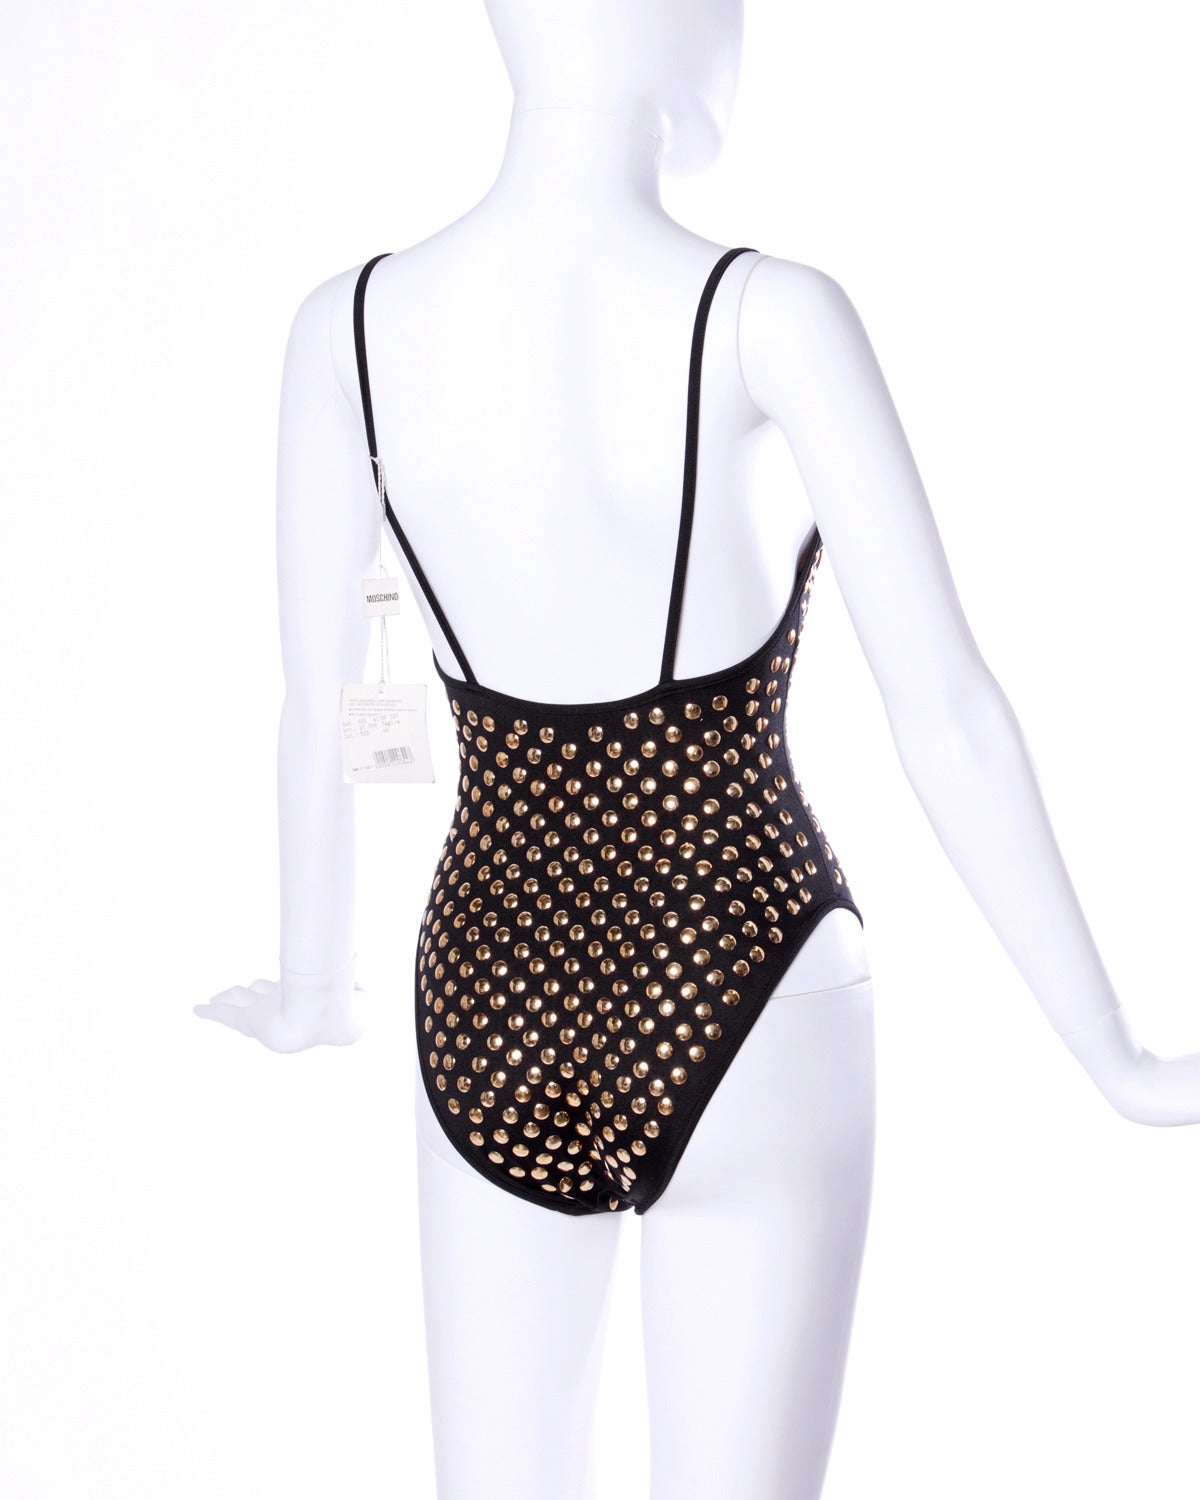 Unworn with the original tags still attached! Vintage Moschino Mare swim suit or body suit with gold studs. 

Details:

Partially Lined
No Closure/ Fabric Contains Stretch
Estimated Size: XS
Color: Black/ Gold
Label: Moschino